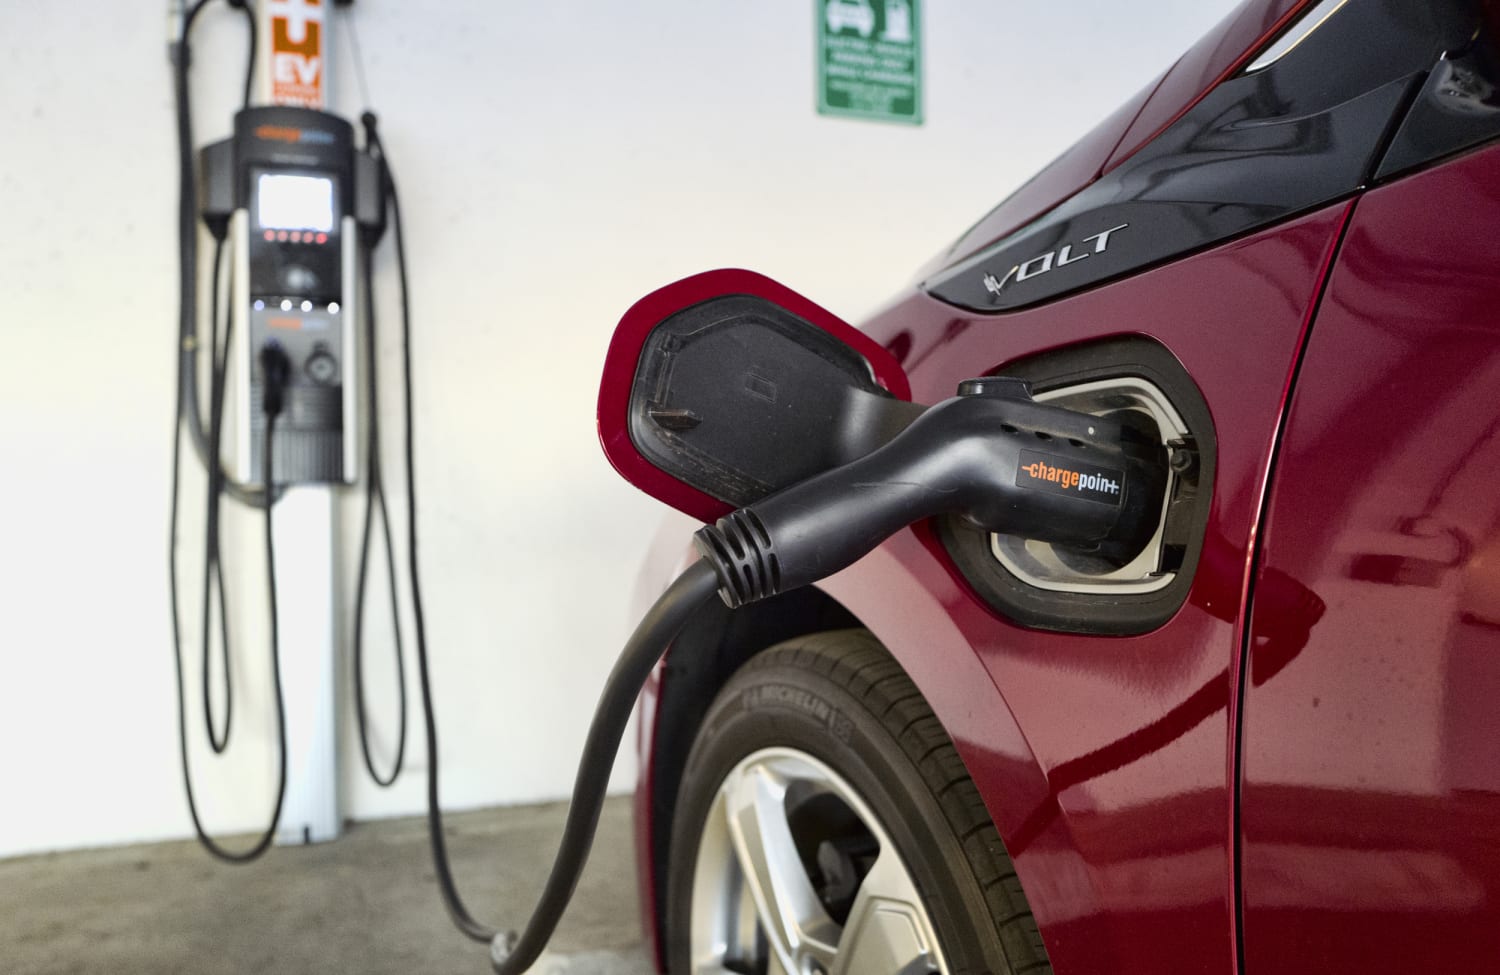 U.S. Highways To Get 500,000 Electric Vehicle Charging Stations